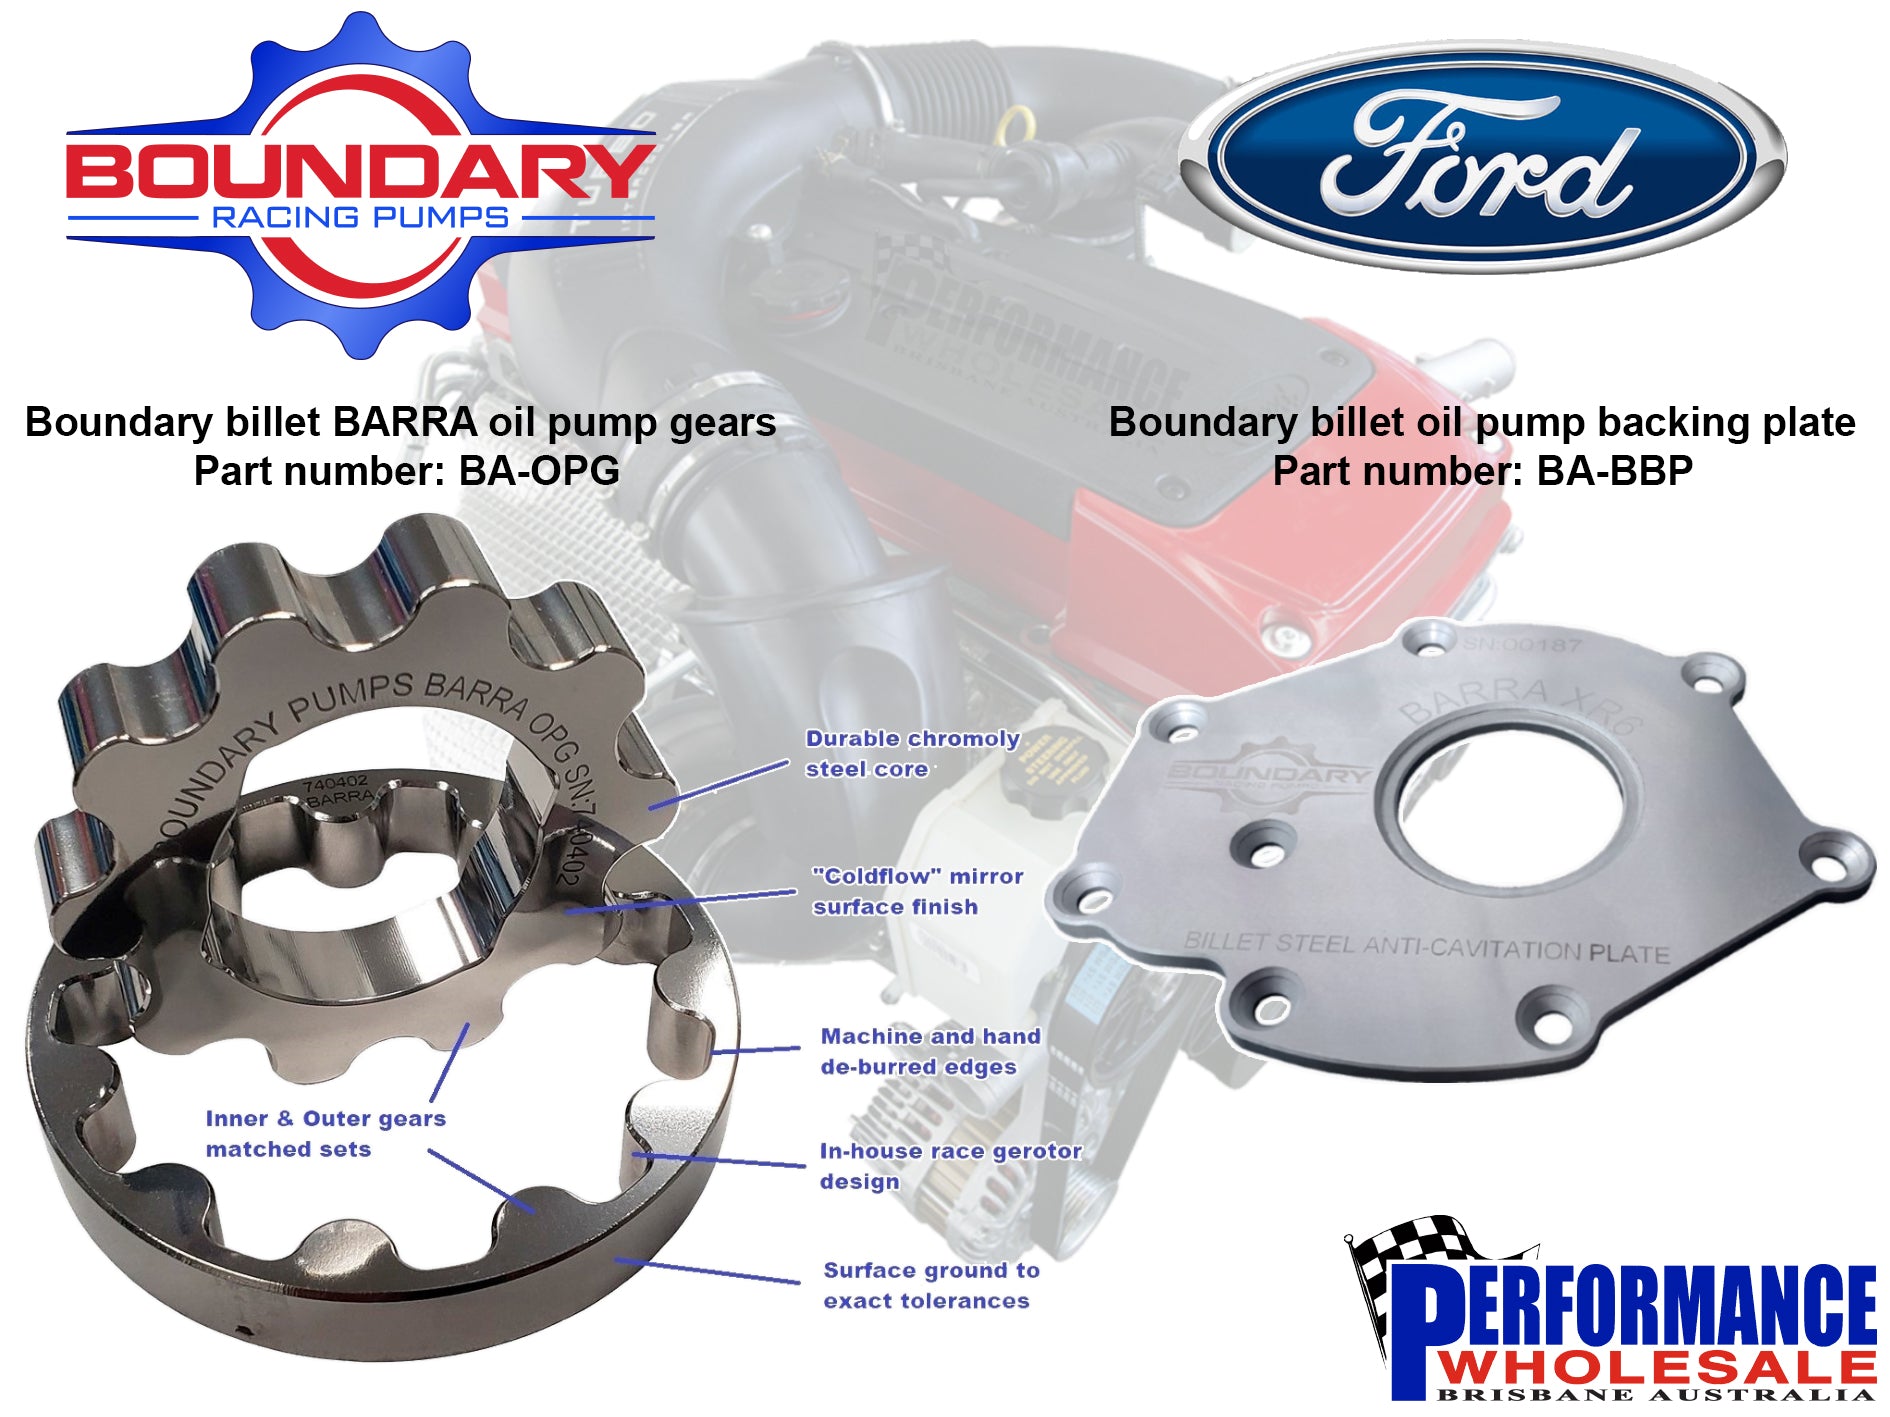 Boundary Barra oil pump gears and backing plate